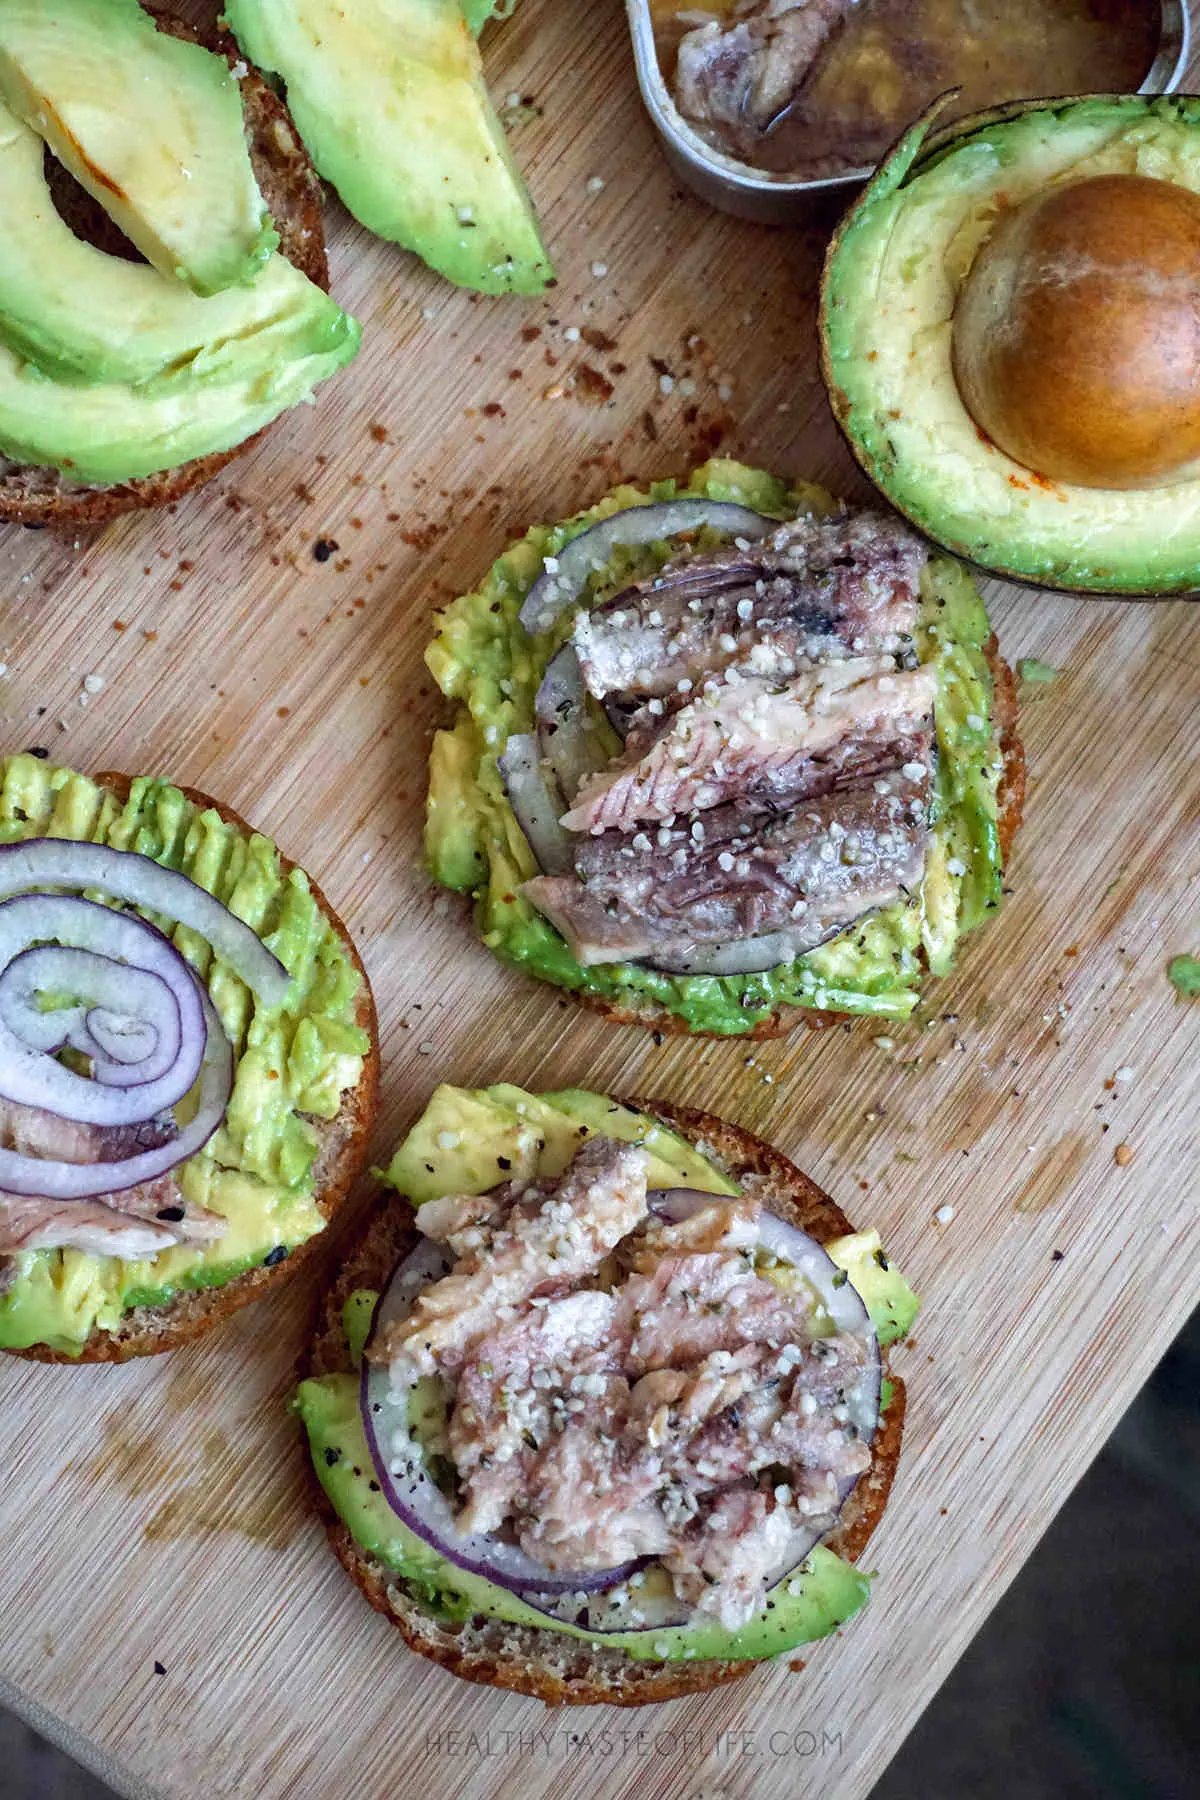 Gluten free dairy free avocado toast made with homemade gluten free buns topped with sardines, red onion and finished with hemp seeds.